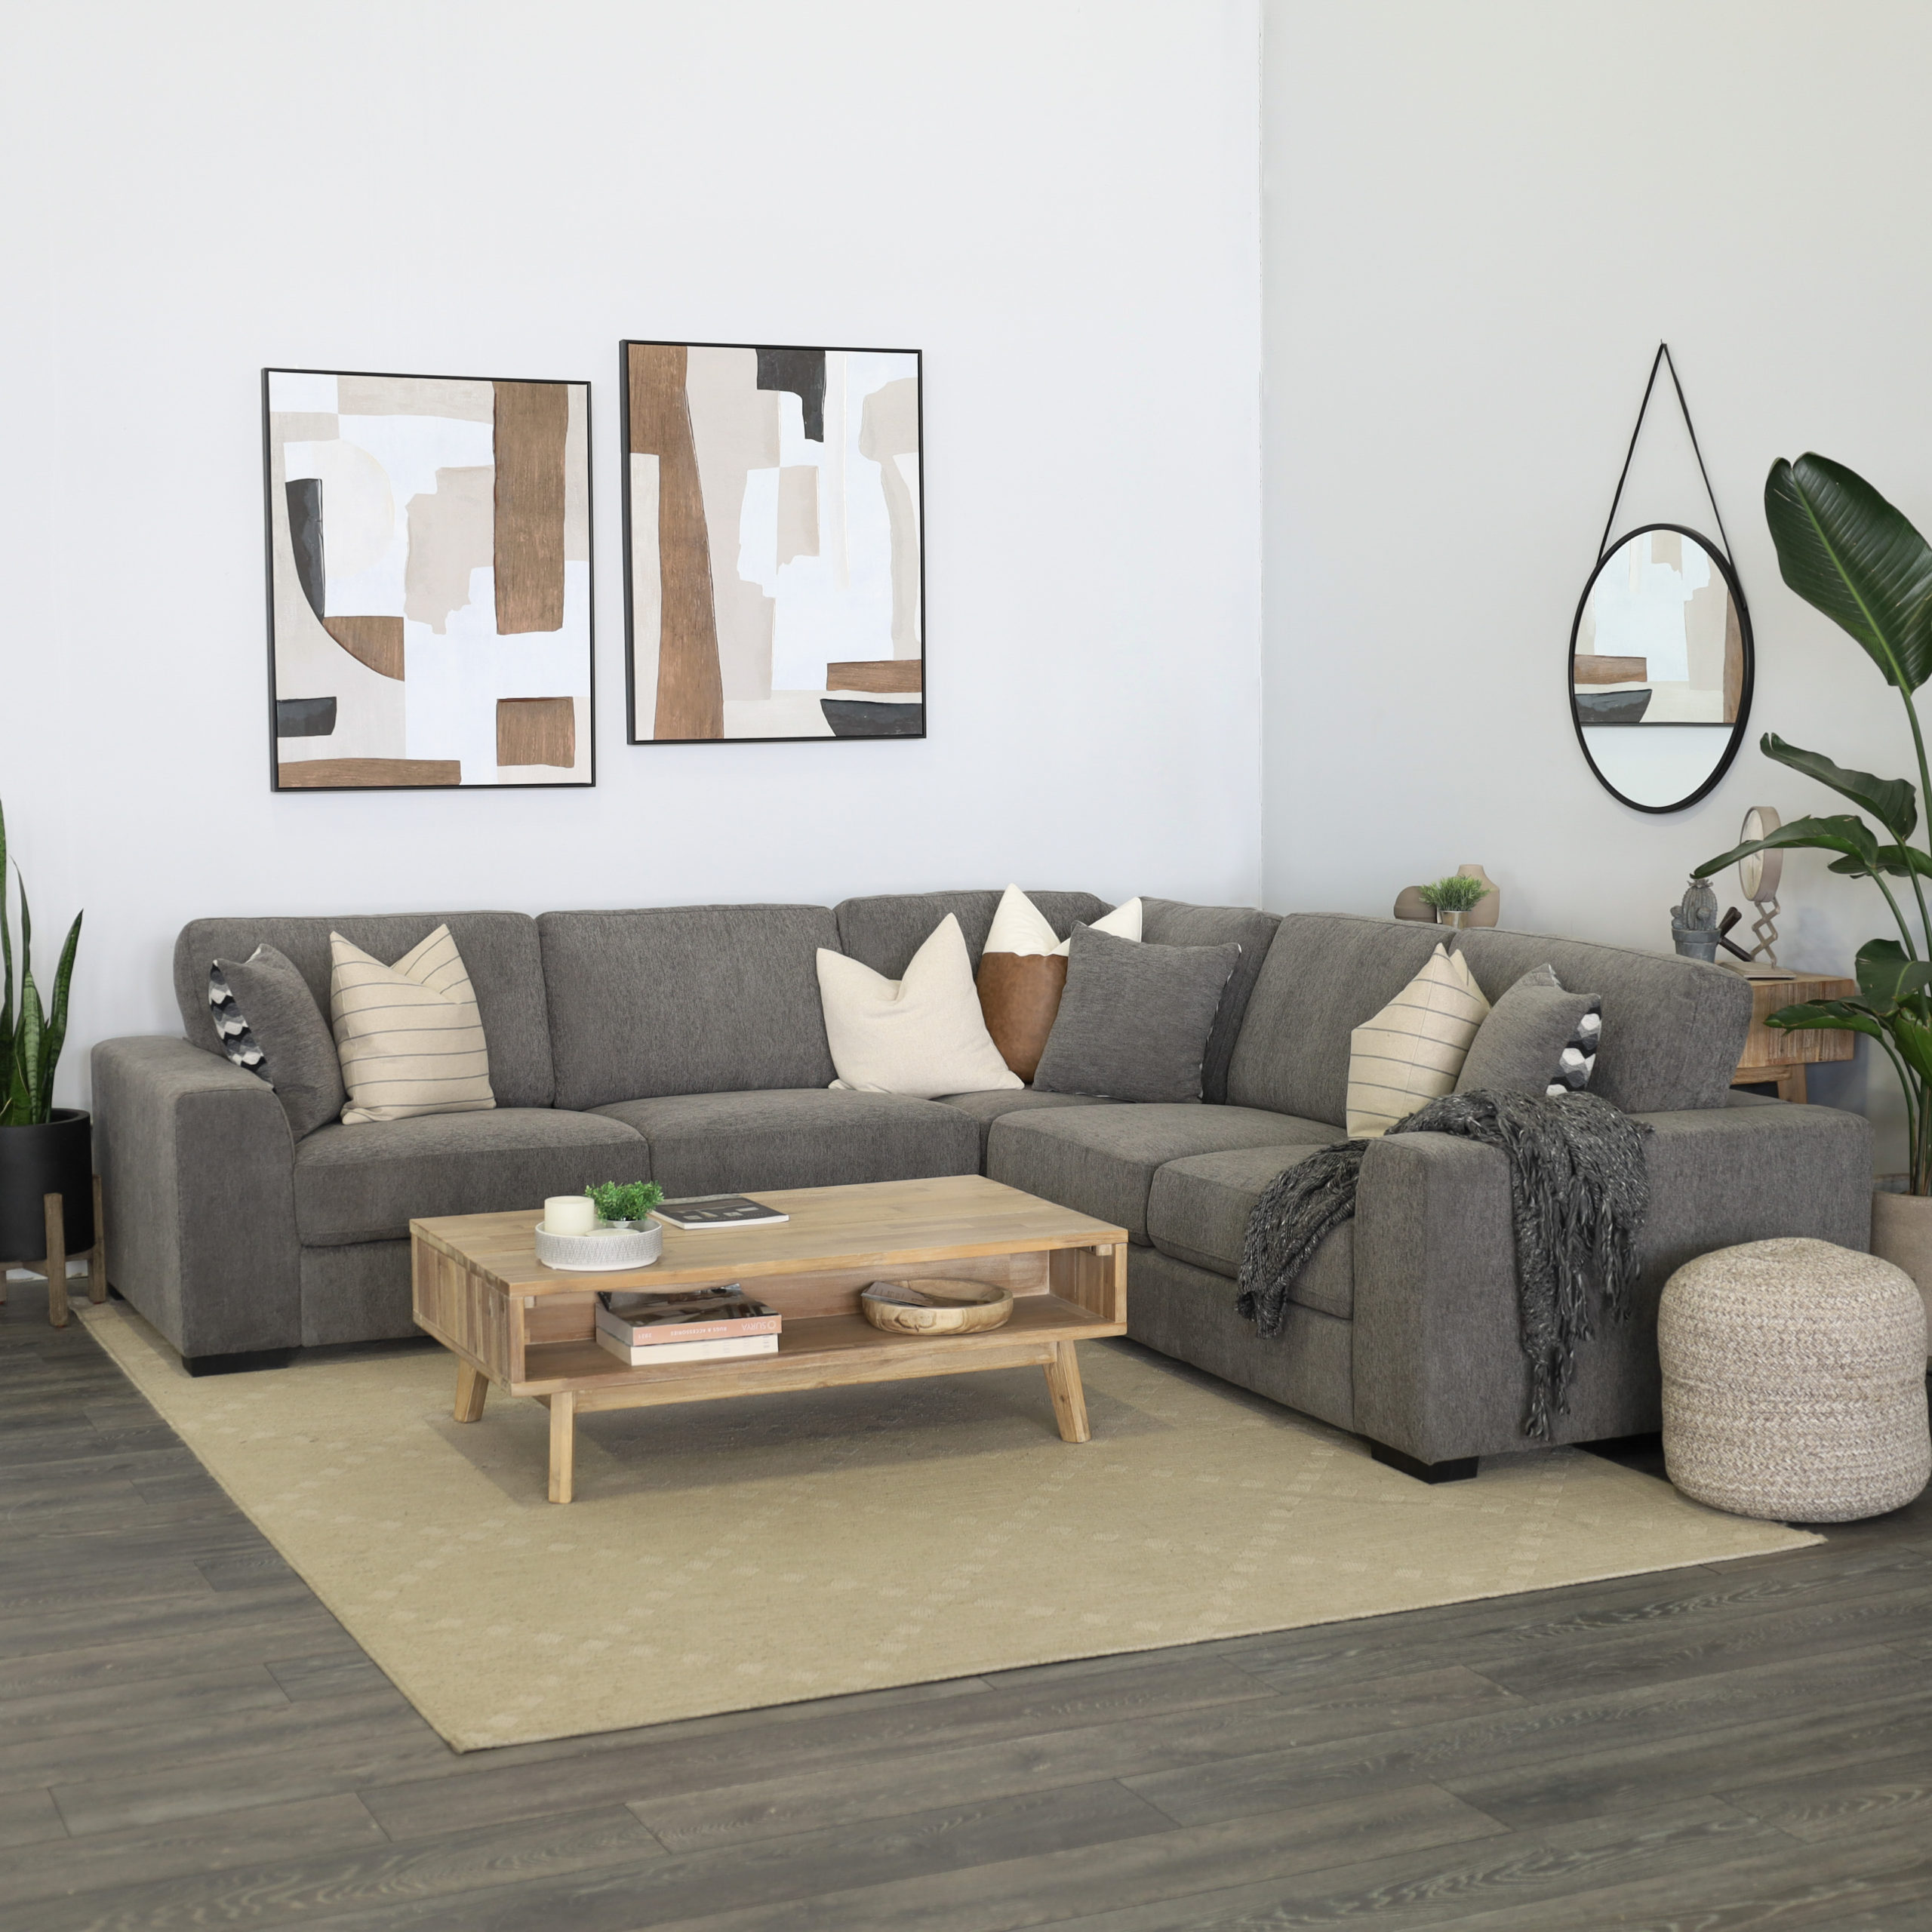 Micaela Arm to Arm Sectional Living Room